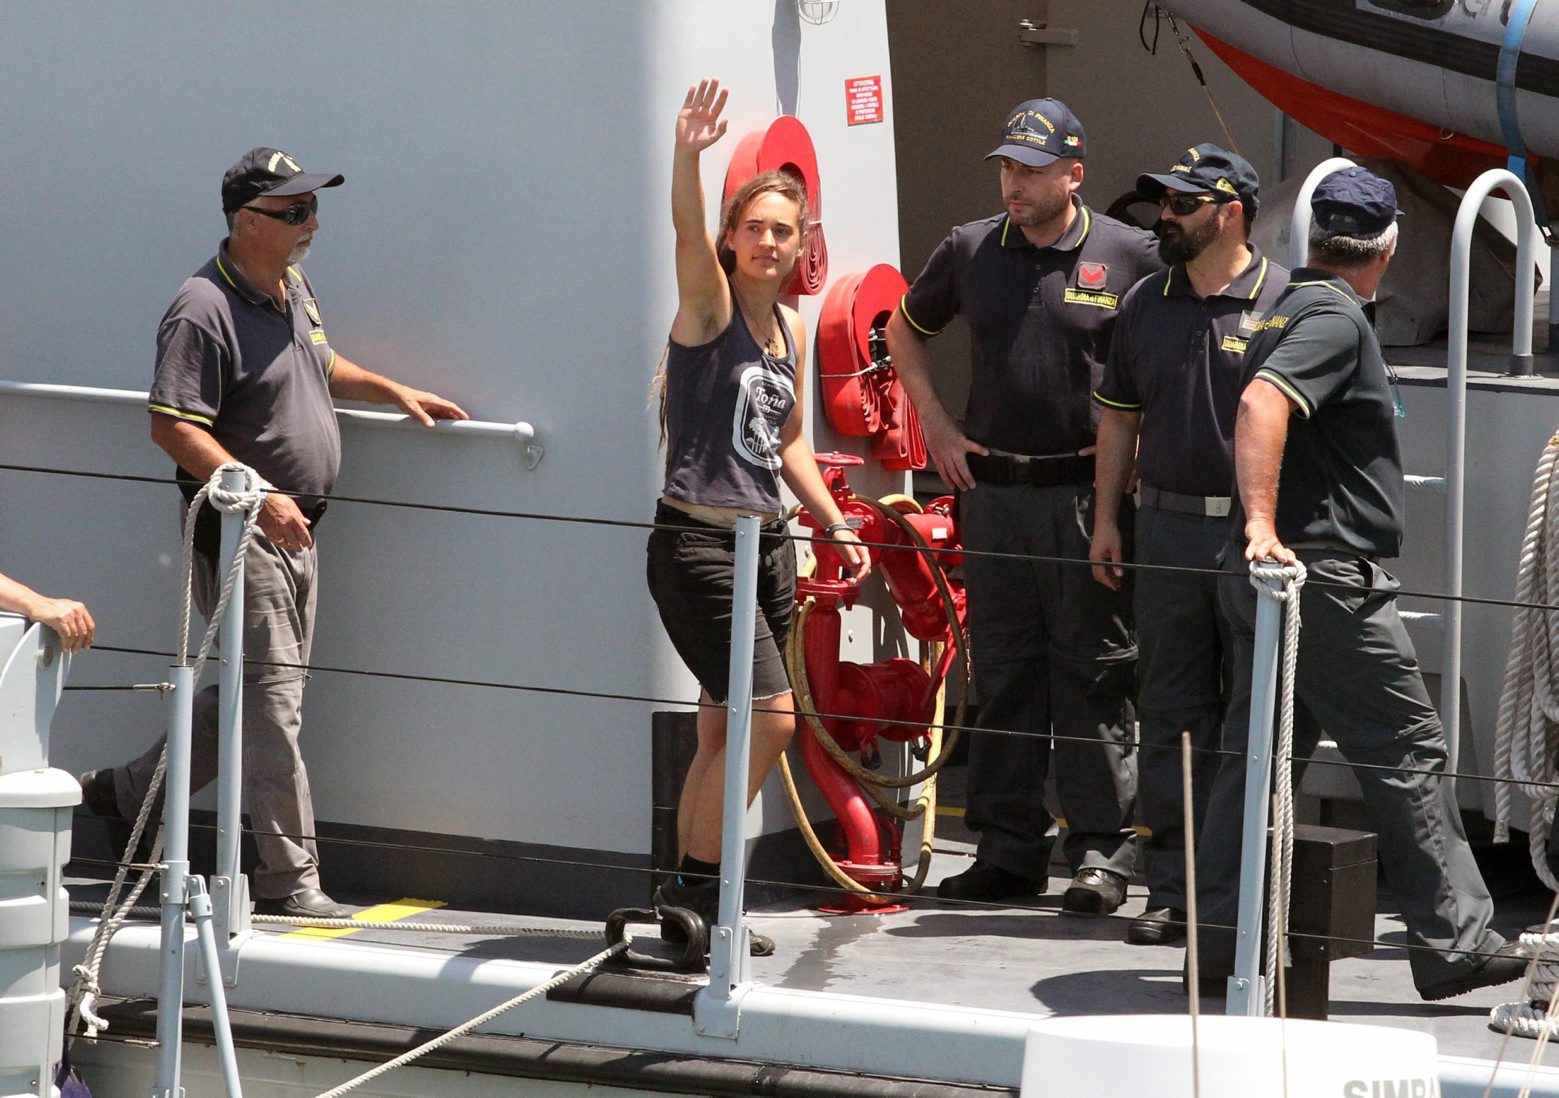 epa07686965 Rescue ship 'Sea-Watch 3' captain Carola Rackete (C), who is being held on charges of abetting immigration and ramming a police cutter, waves to spectators as she arrives in Porto Empedocle, Italy, 01 July 2019. German captain Carola Rackete was arrested on 29 June reportedly after violating orders from the Italian Finance Police and entering the port of Lampedusa while ramming a patrol boat on migrant rescue ship 'Sea-Watch 3'.  EPA/PASQUALE CLAUDIO MONTANA LAMPO ITALY MIGRATION SEA WATCH